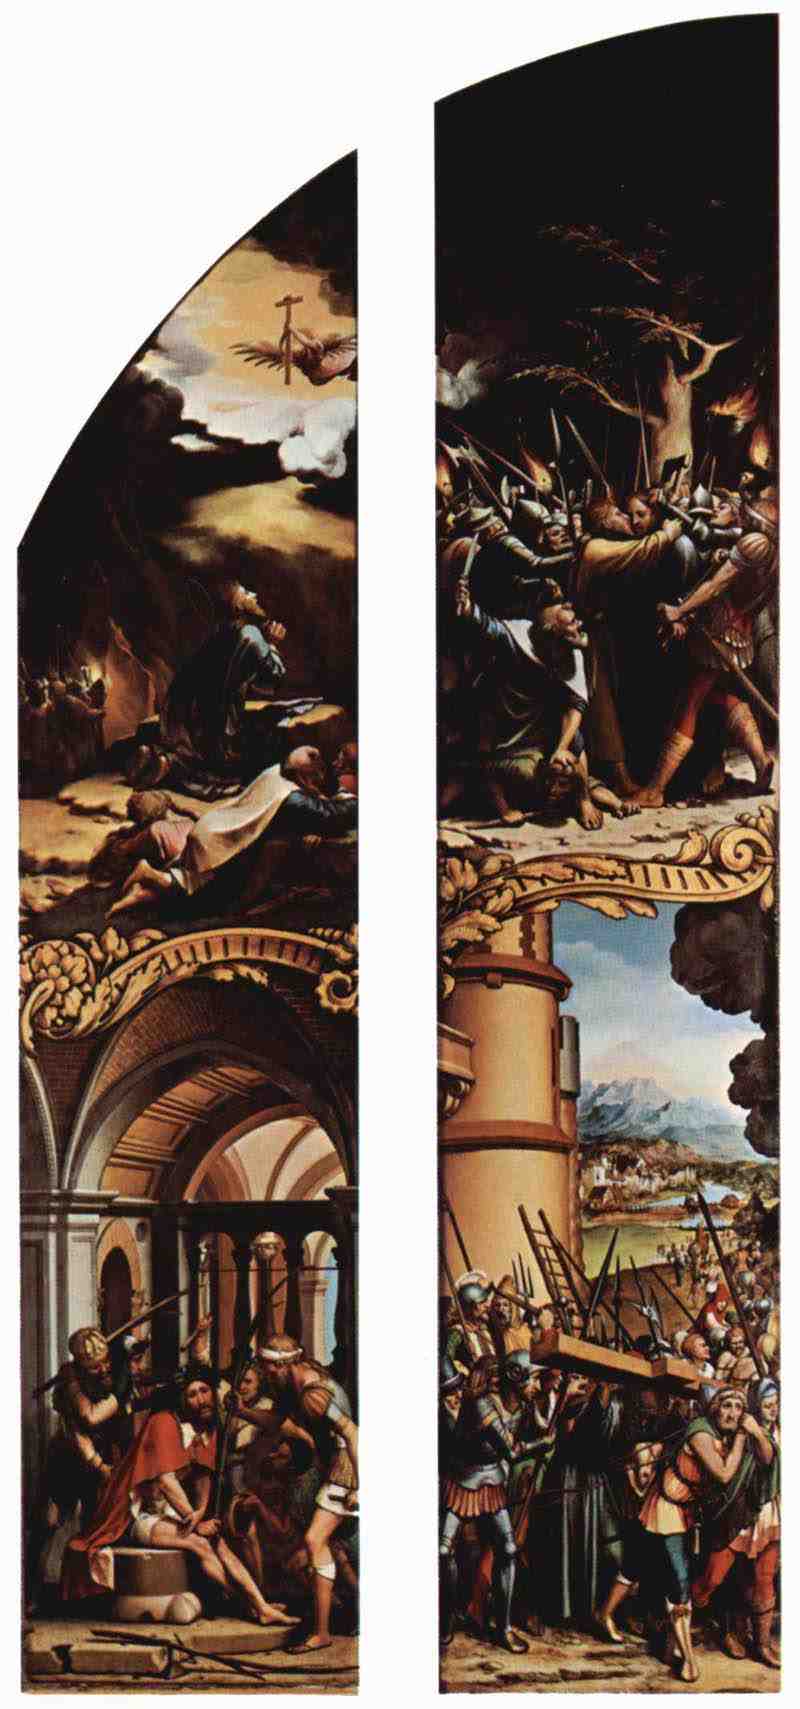 Passion altar, left outer panel Scenes: Mocking of Christ, Christ on the Mount of Olives, left inner panel Scenes: Cross and Judas kiss. Hans Holbein the Younger